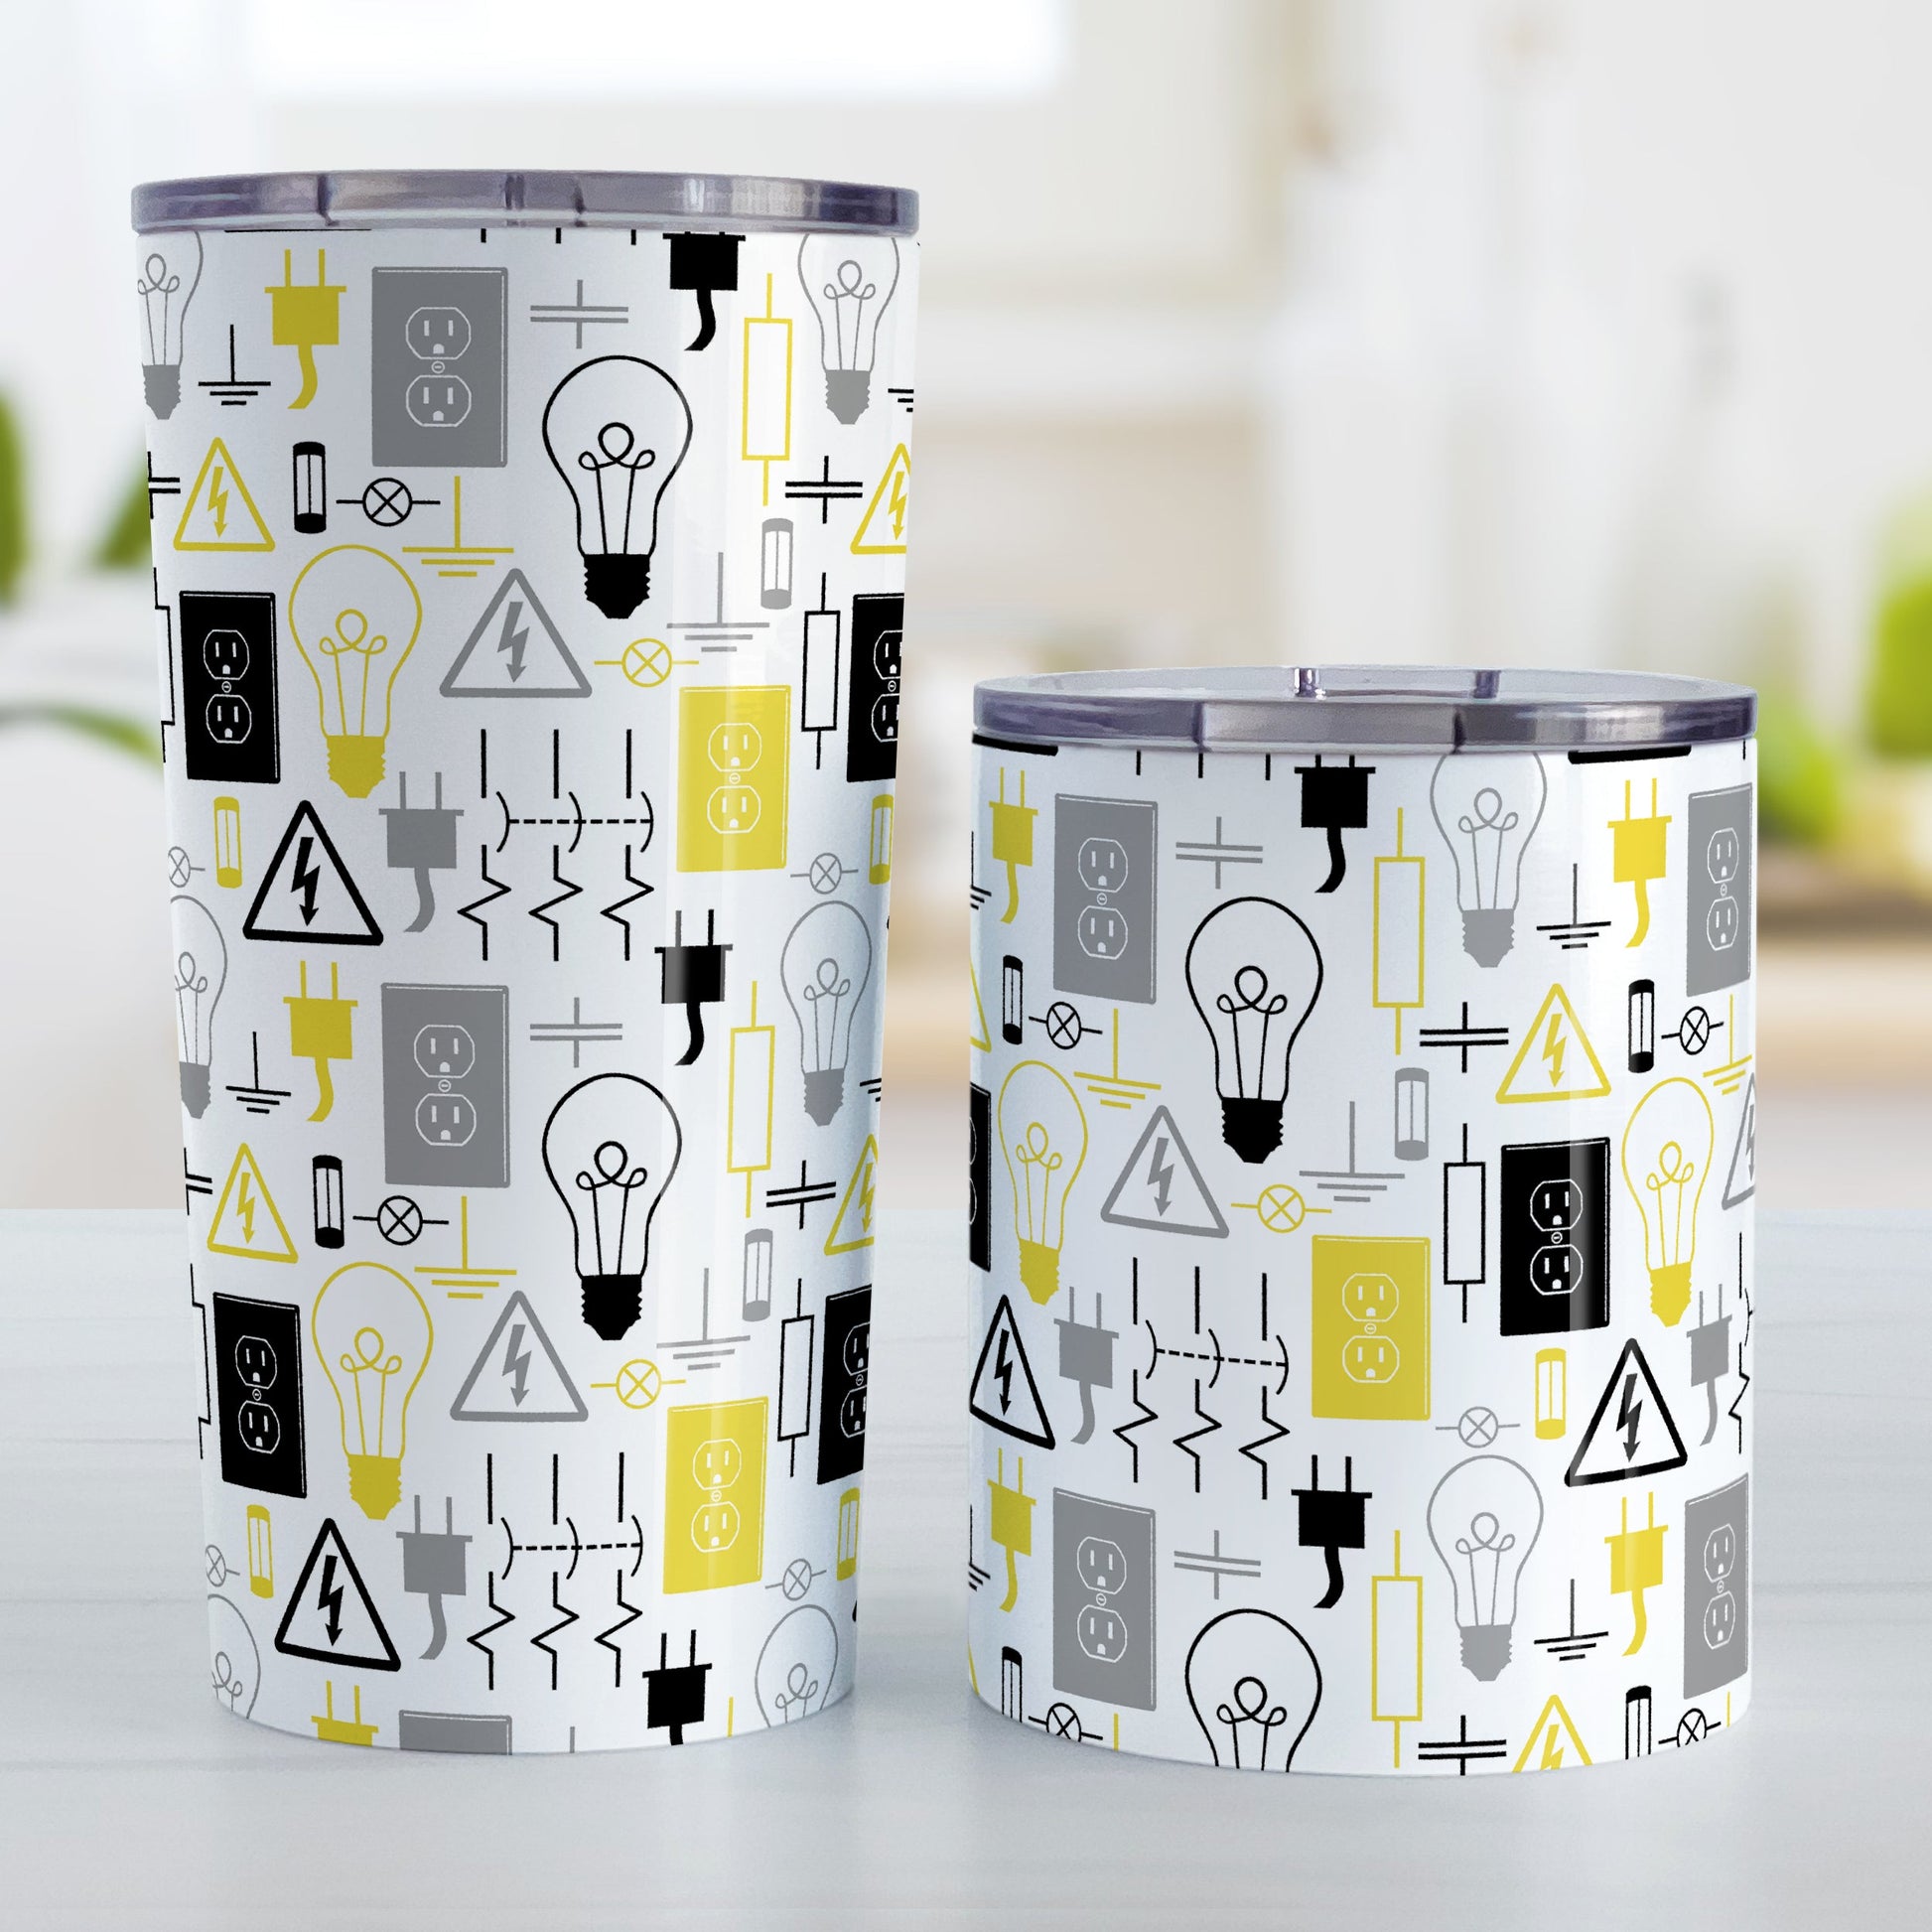 Yellow Electrical Electrician Tumbler Cup (20oz and 10oz) at Amy's Coffee Mugs. Stainless steel insulated tumbler cups designed with an electrical pattern with light bulbs, wall sockets, plugs, fuses, and other electricity symbols in yellow, gray, and black colors that wraps around the cups. These cups are perfect for people who work a trade as an electrician, love working with electronics, and working in electrical engineering. Photo shows both sized cups next to each other.